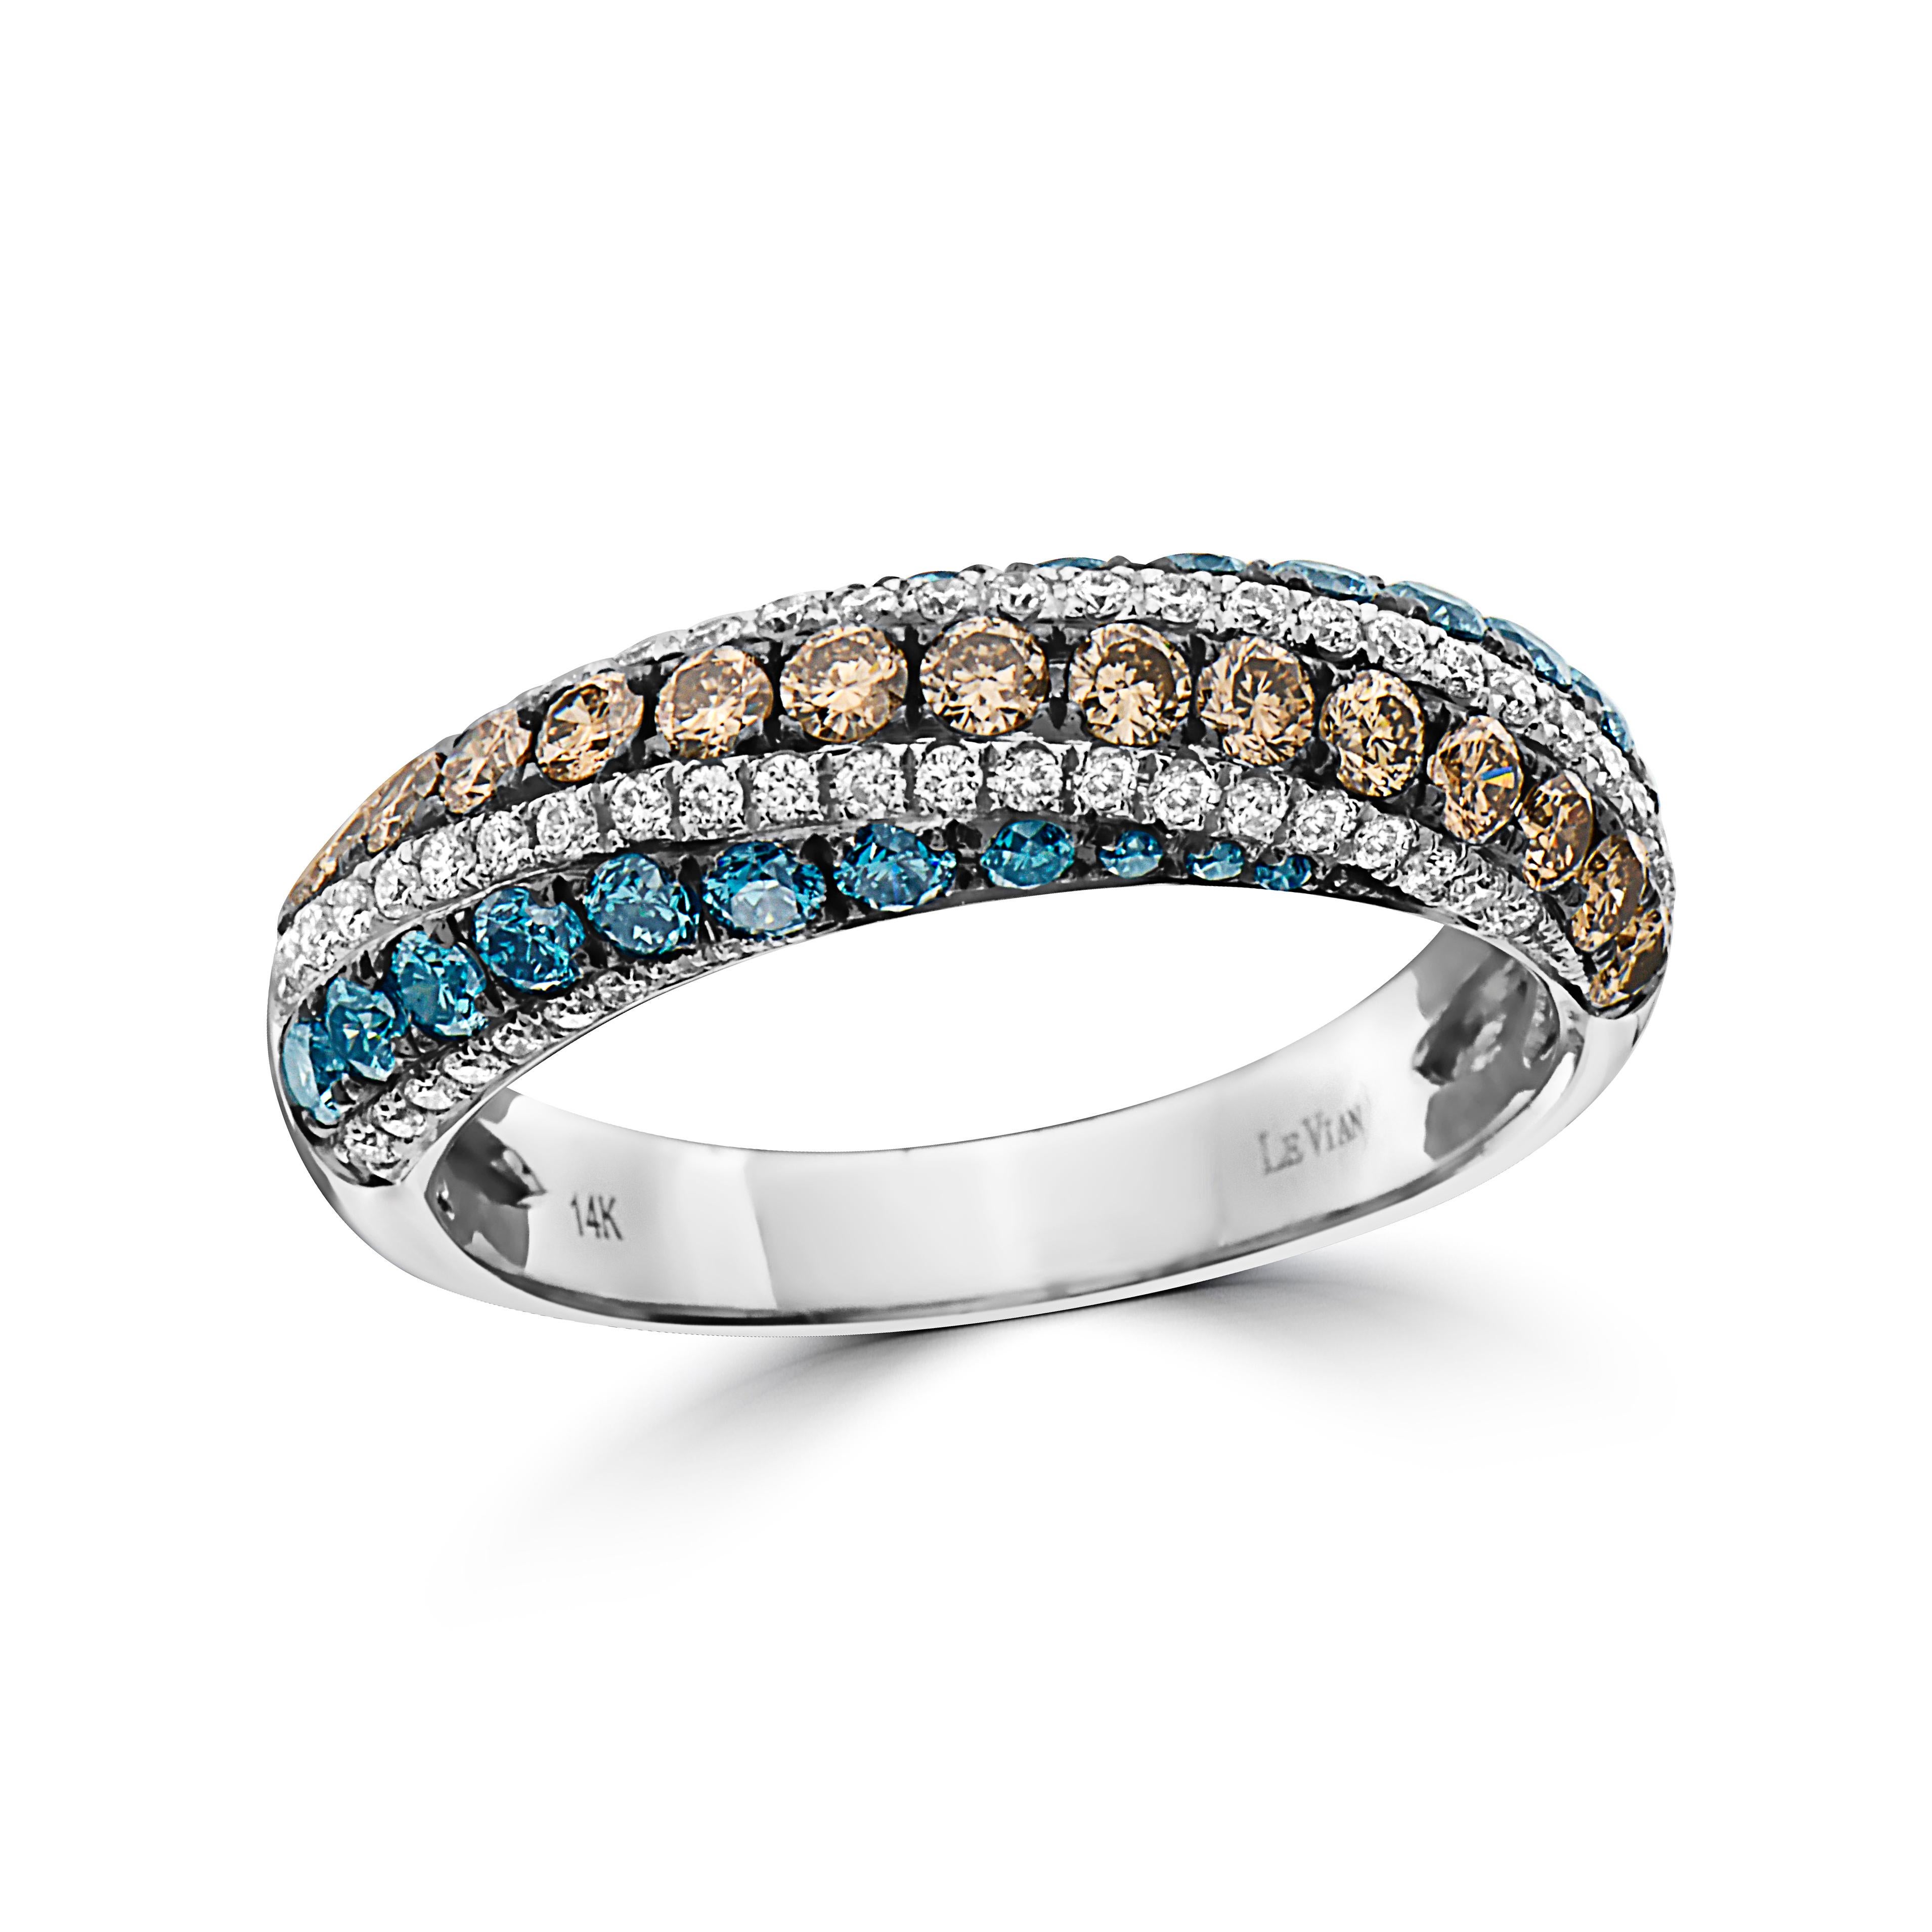 LeVian 14K White Gold Round Iced Blue Chocolate Brown Diamonds Cocktail Ring
